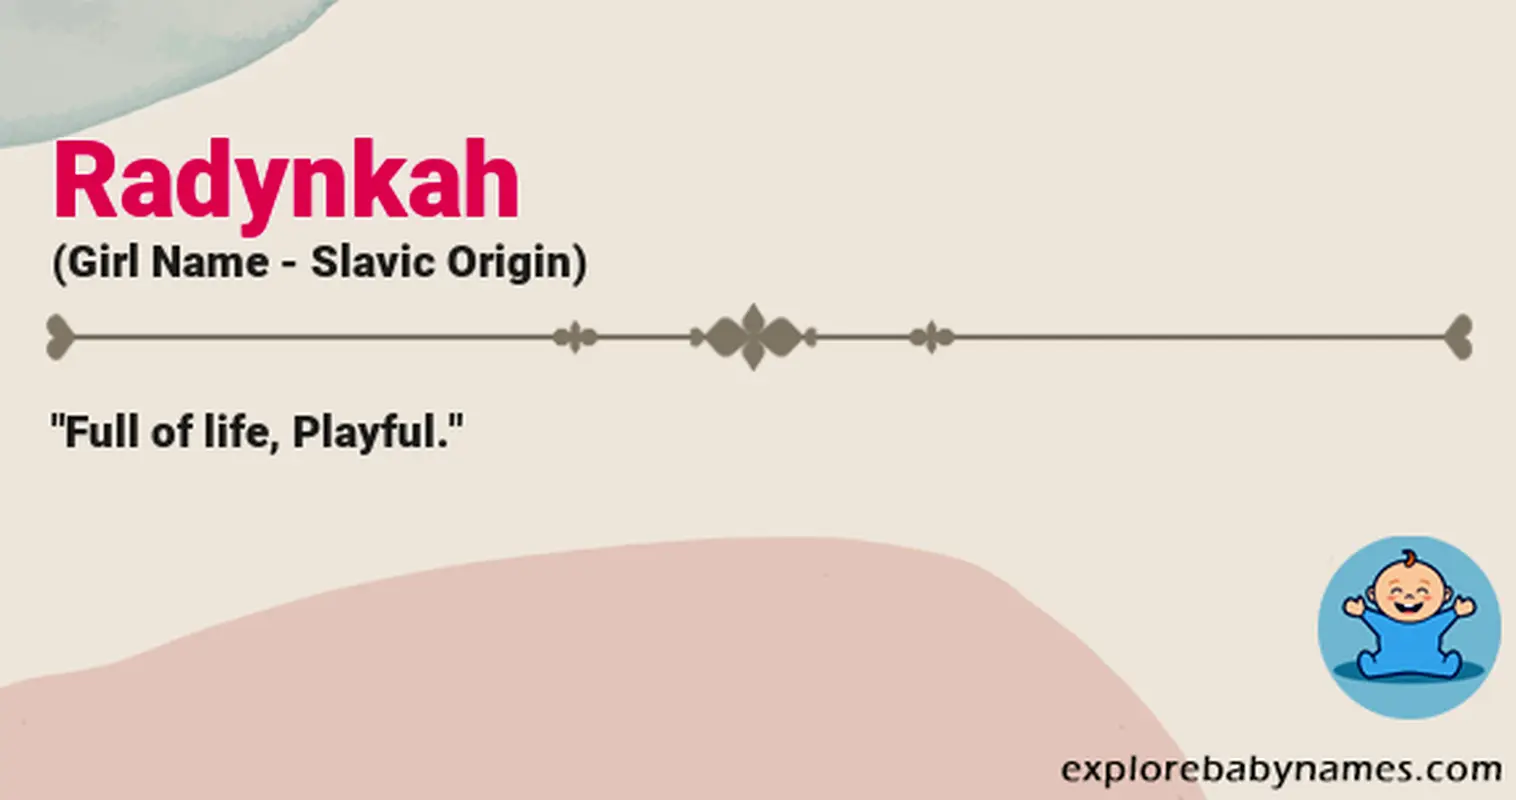 Meaning of Radynkah